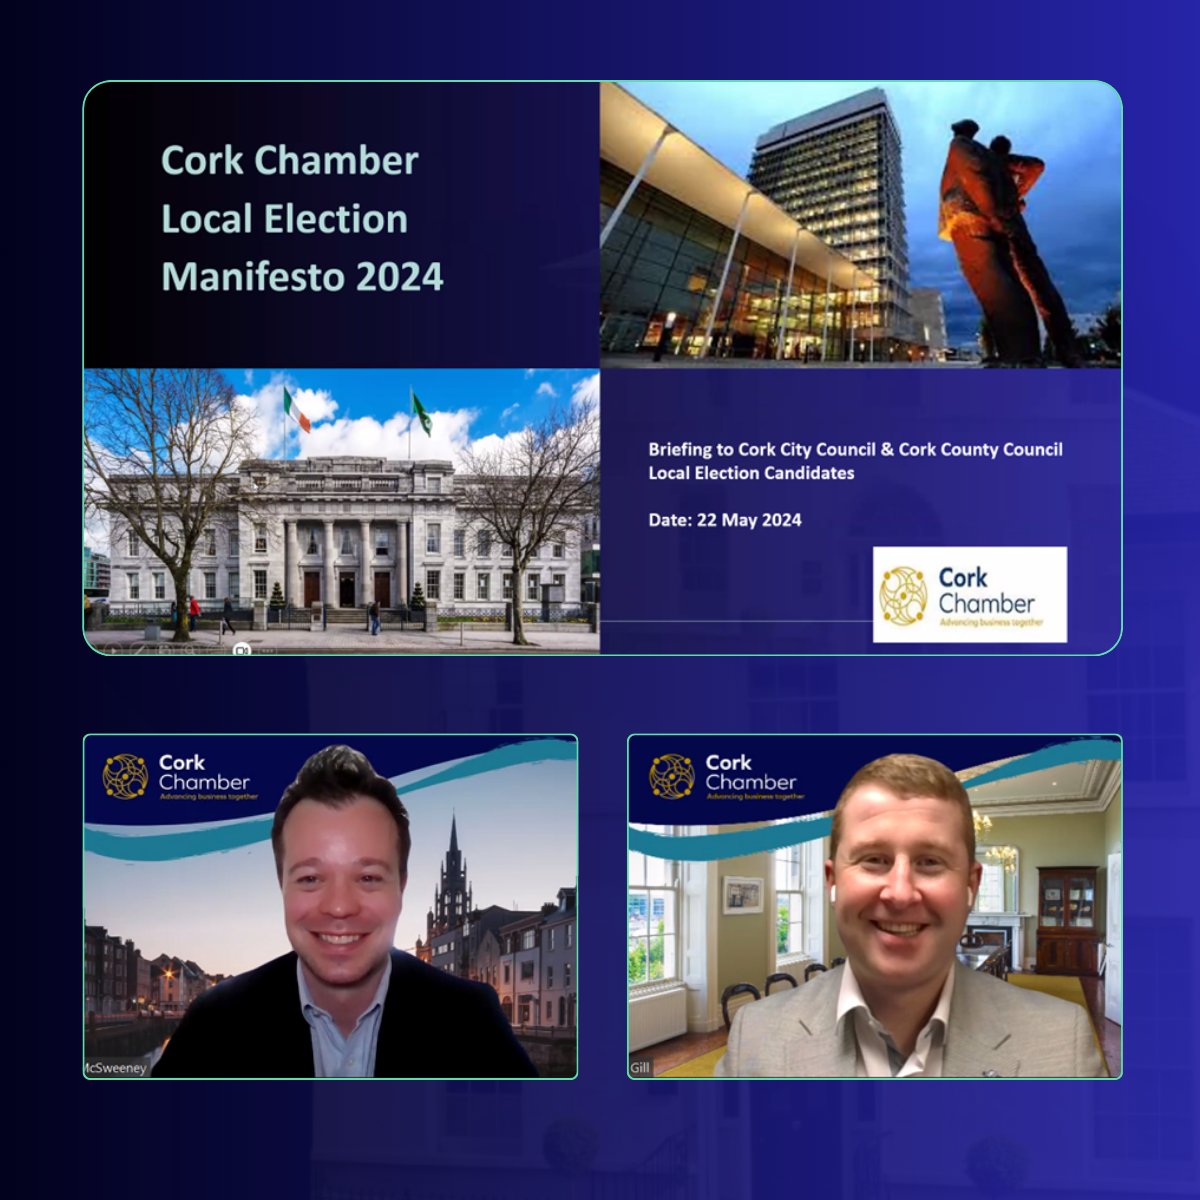 Last Wednesday we were delighted to provide an opportunity for all #localelection candidates to hear our manifesto priorities at our webinar briefing session. Browse our manifesto to see asks relating to the eight priority areas, here issuu.com/chamberlink/do…